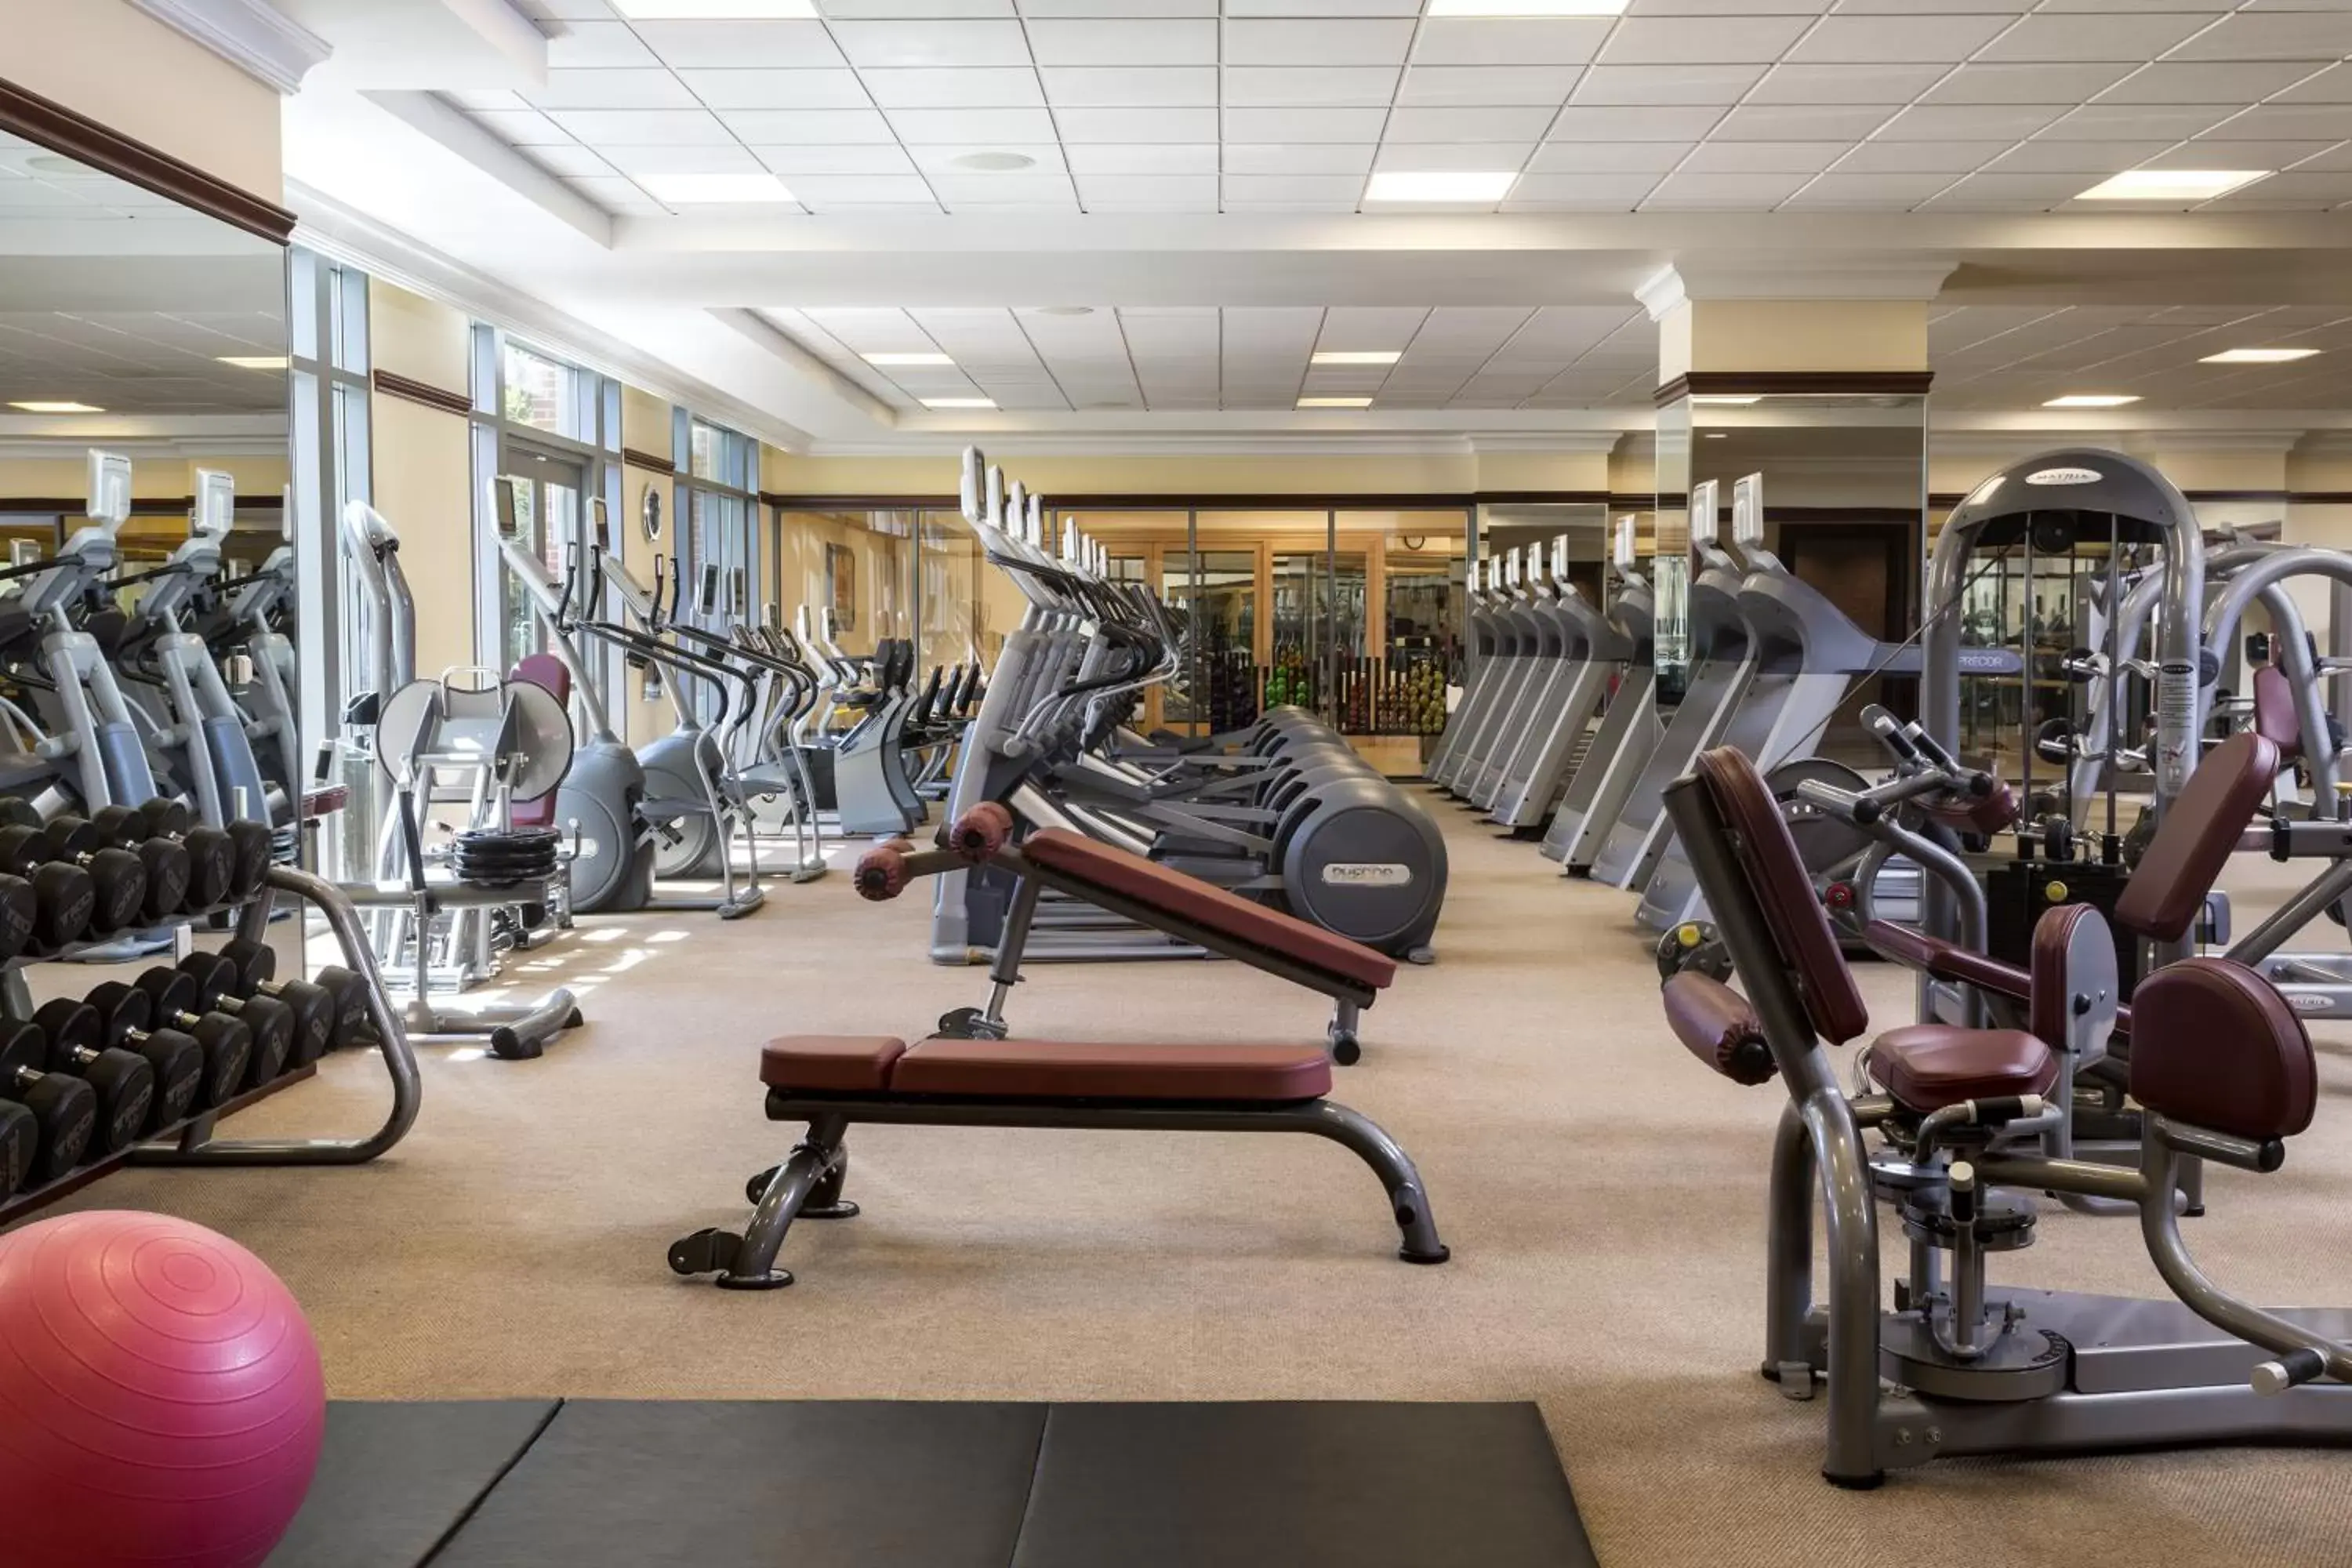 Fitness centre/facilities, Fitness Center/Facilities in Four Seasons Hotel Westlake Village